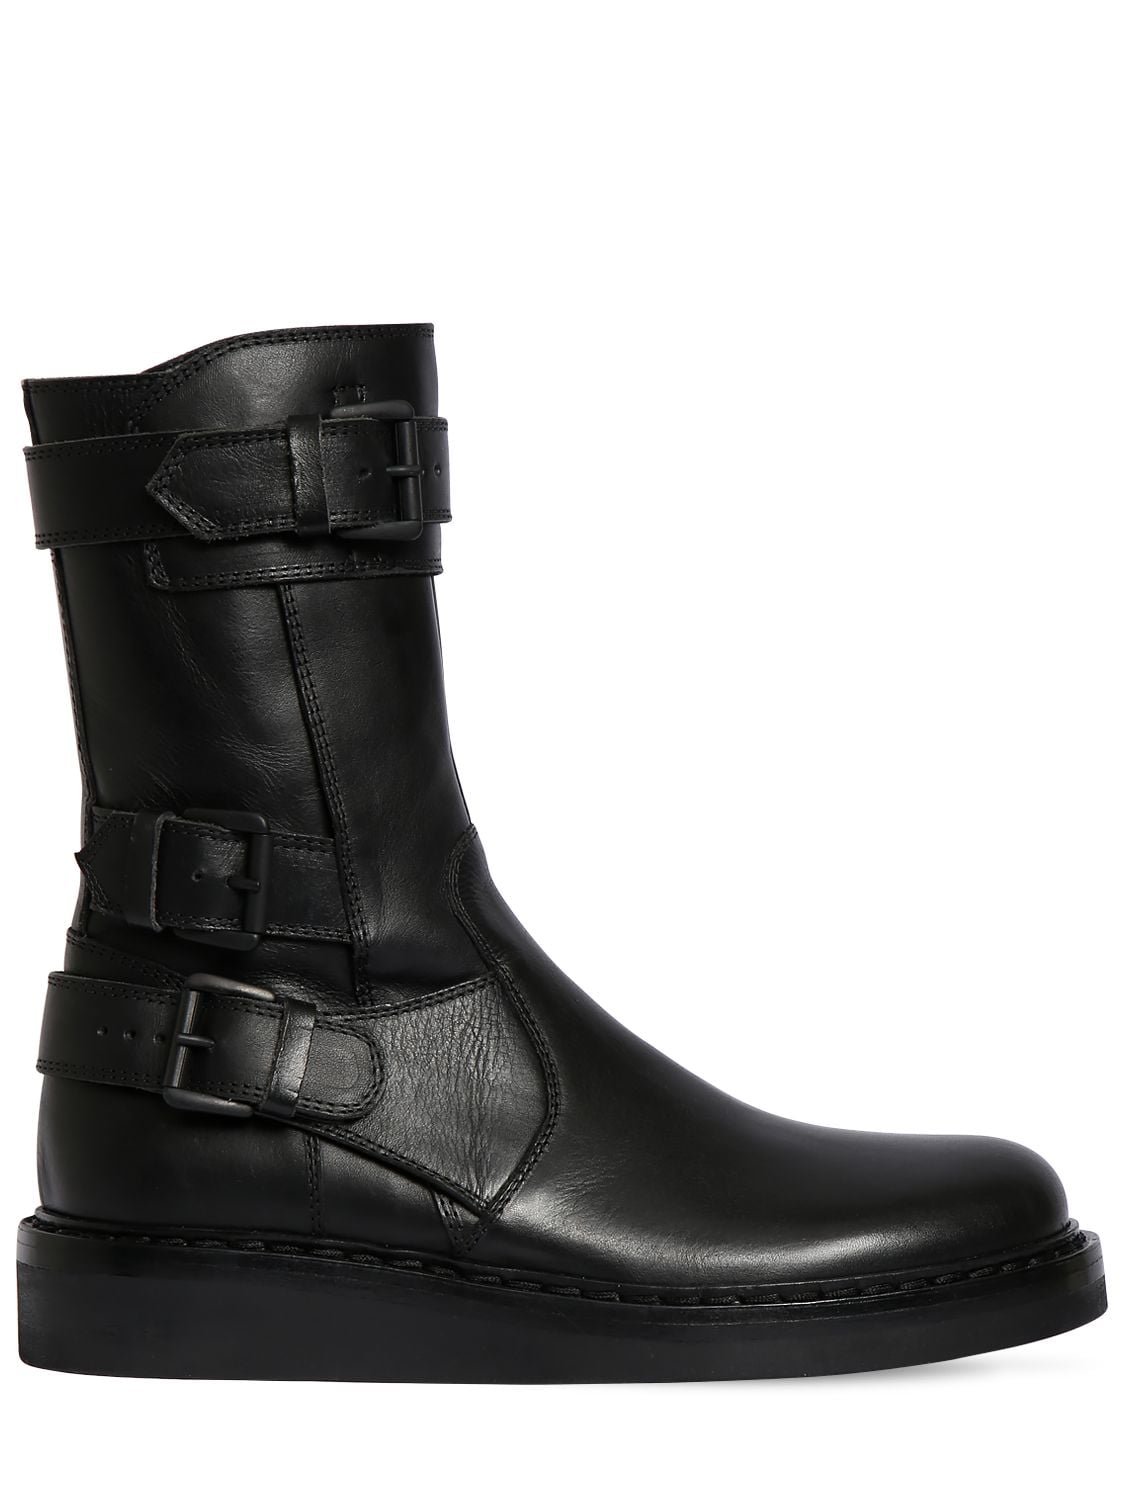 ANN DEMEULEMEESTER 30MM LEATHER ANKLE BOOTS,71I51K004-MDK50